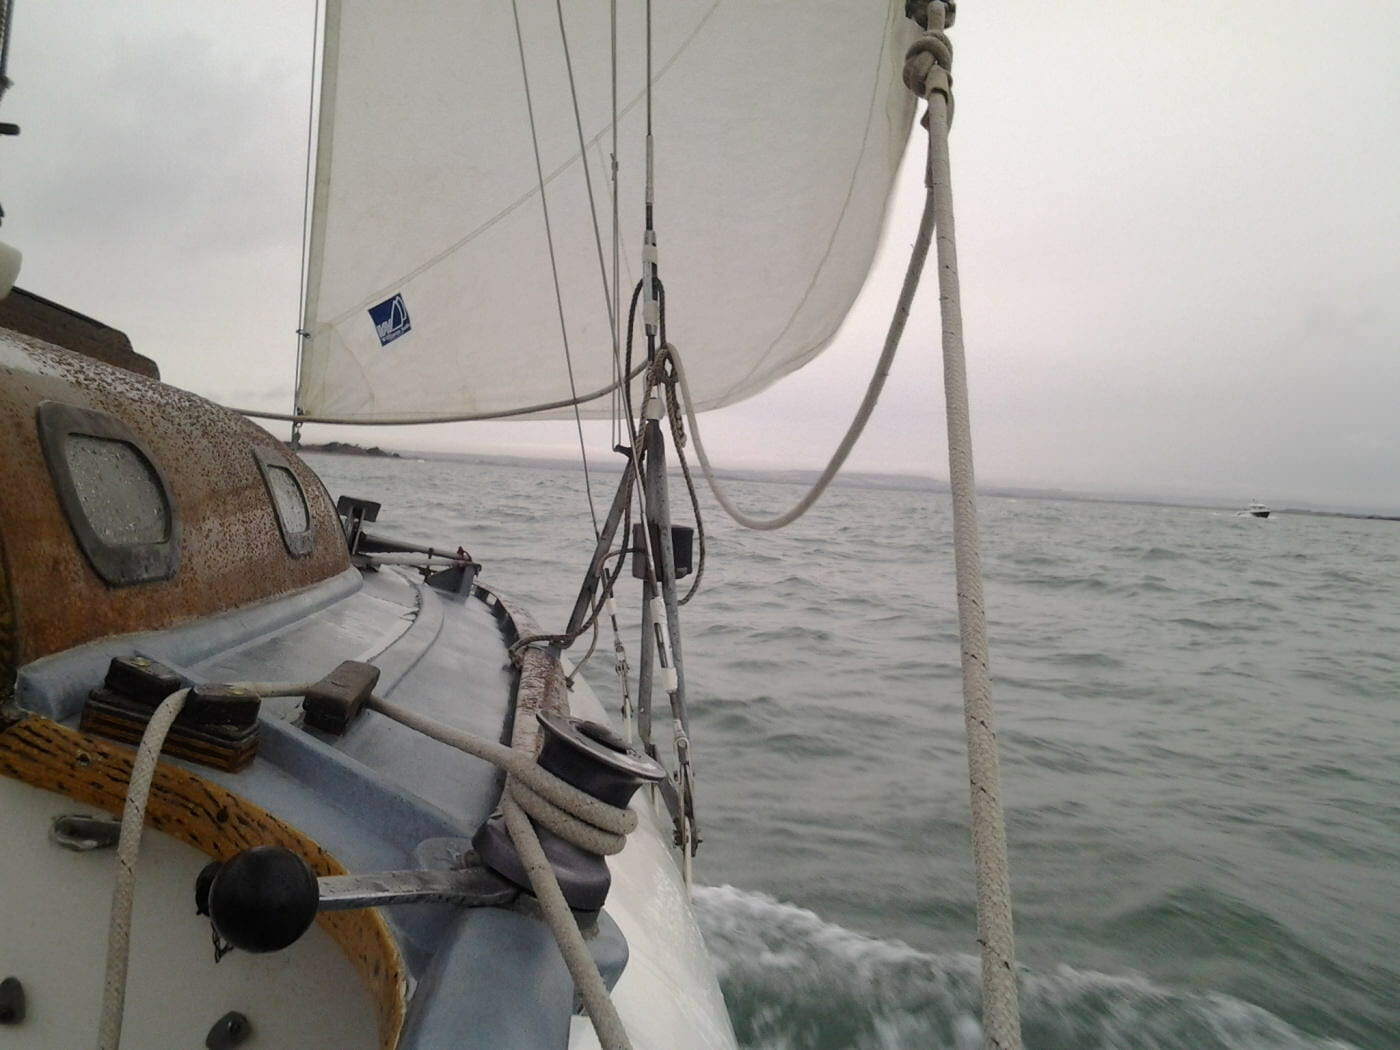 Approaching Chichester Harbour